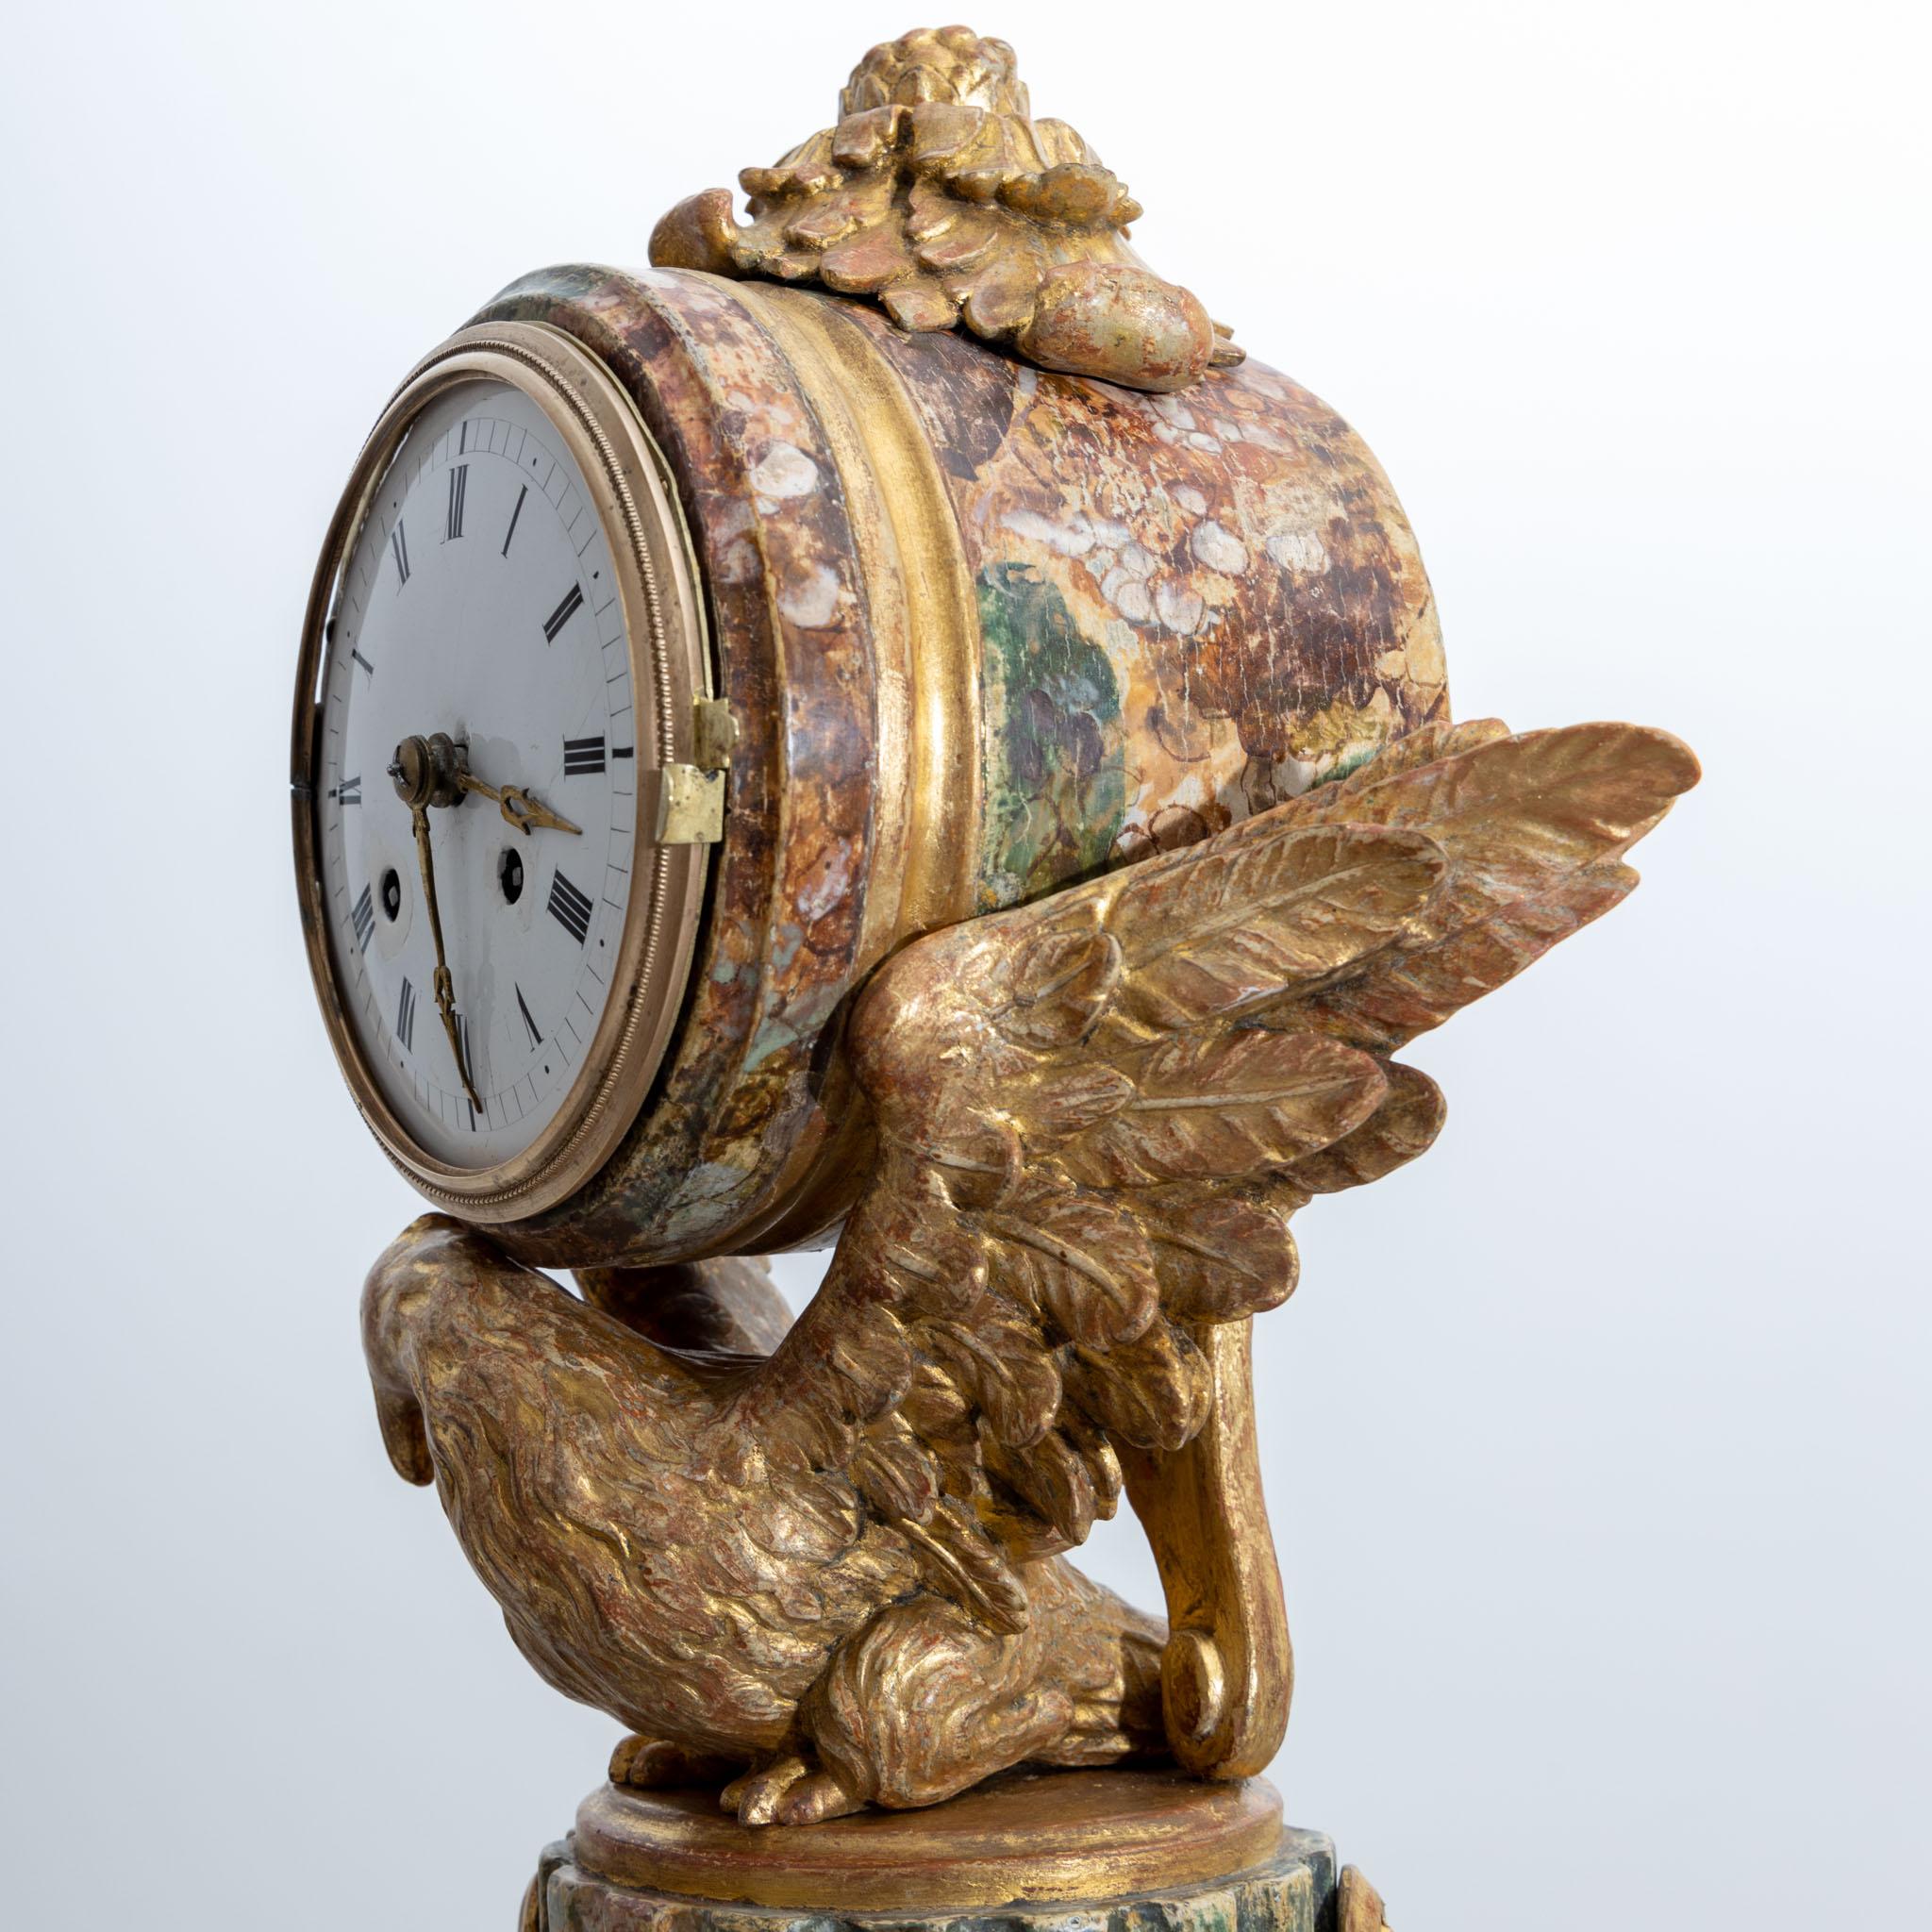 A patinated wooden pendulum on a fluted column stump with festoons and carved eagle decoration, which supports the cylindrical clock case with enamel dial between its stretched wings.